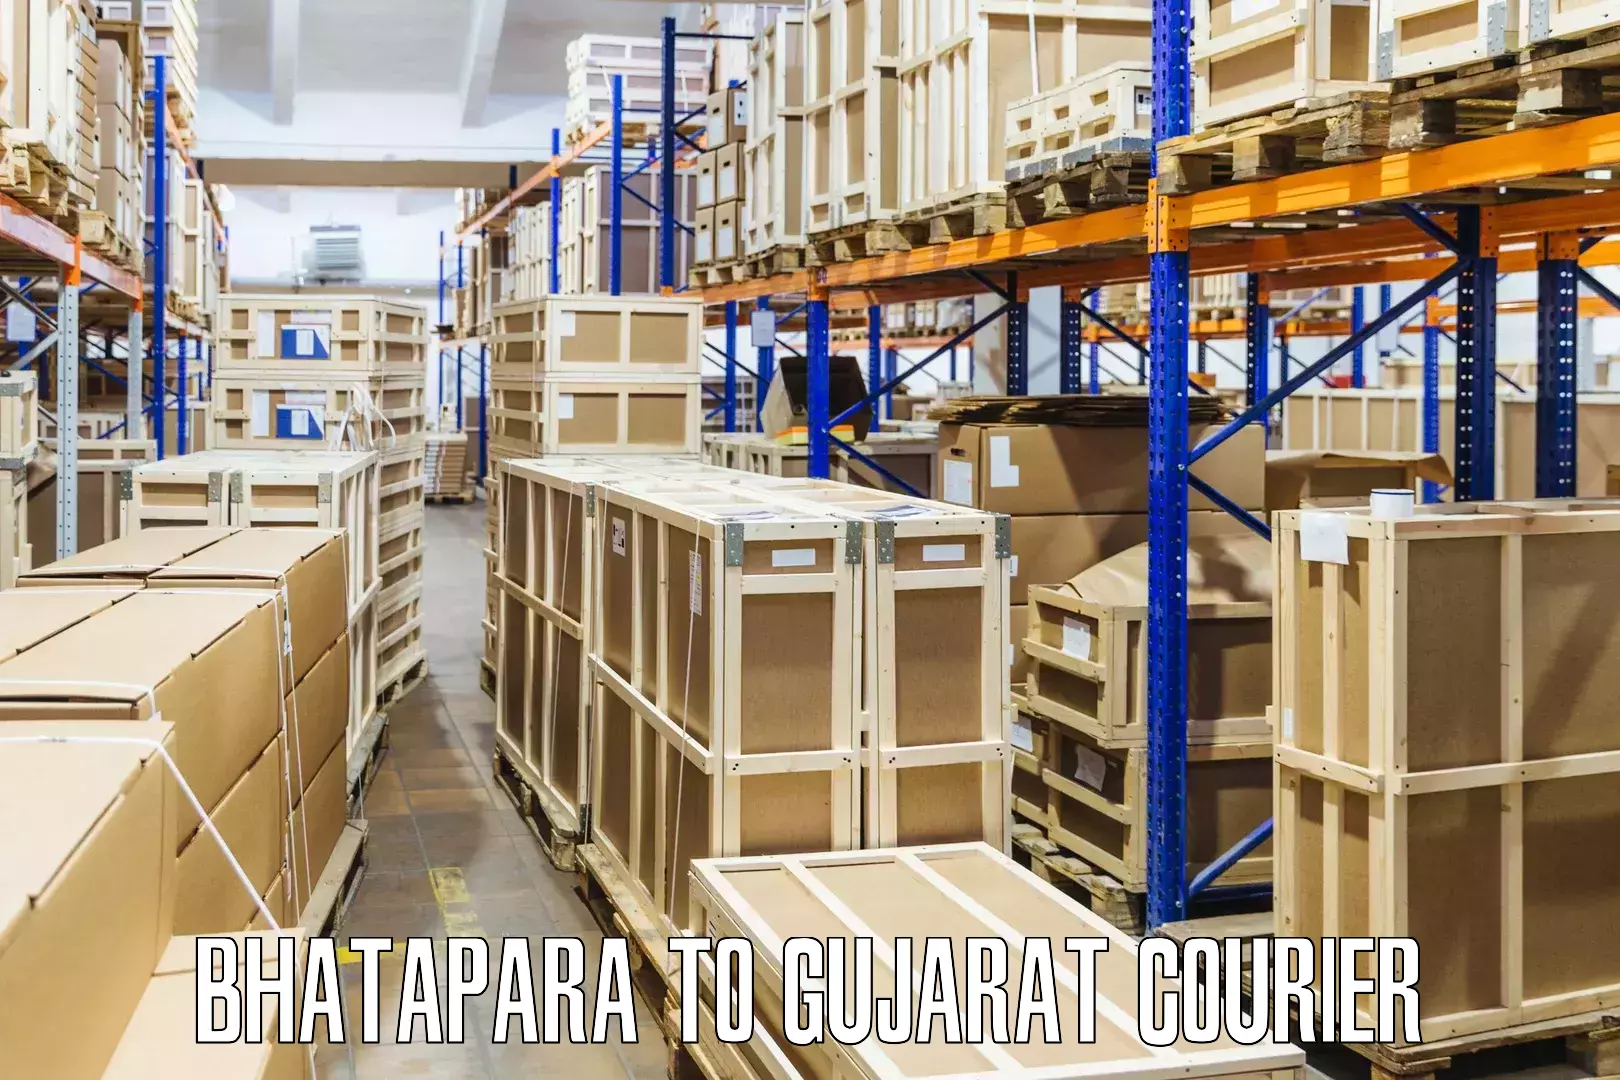 Nationwide delivery network Bhatapara to Dhrangadhra